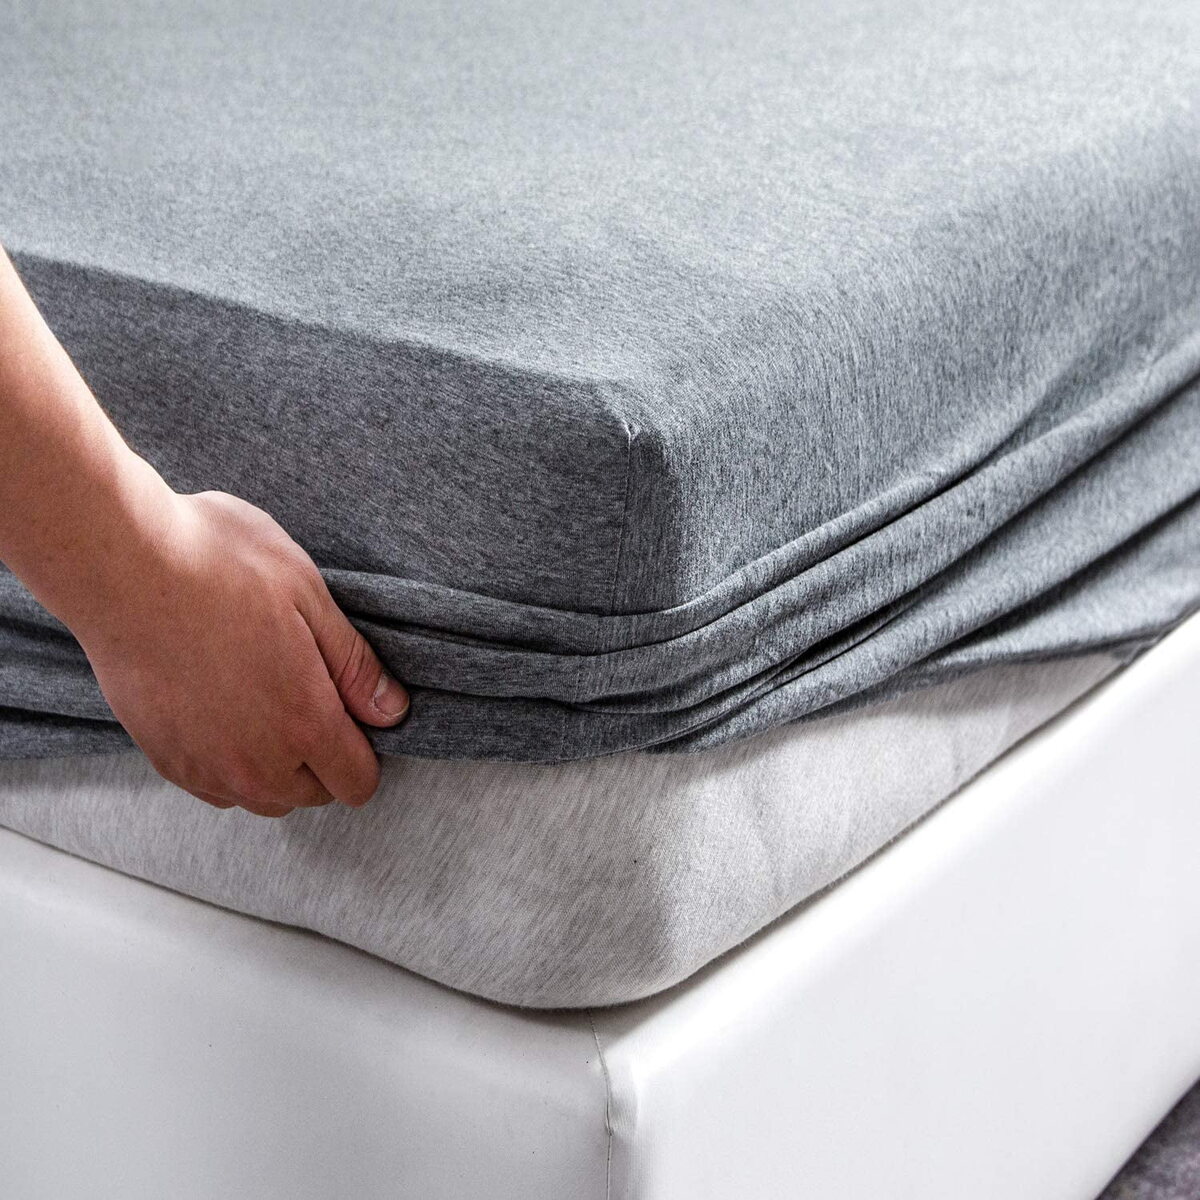 Empyrean Bedding Fitted Sheet Queen Size - Soft Microfiber Queen Fitted  Sheet Only - Moisture Wicking Fitted Bed Sheets Fits Up to 16 Inches Deep